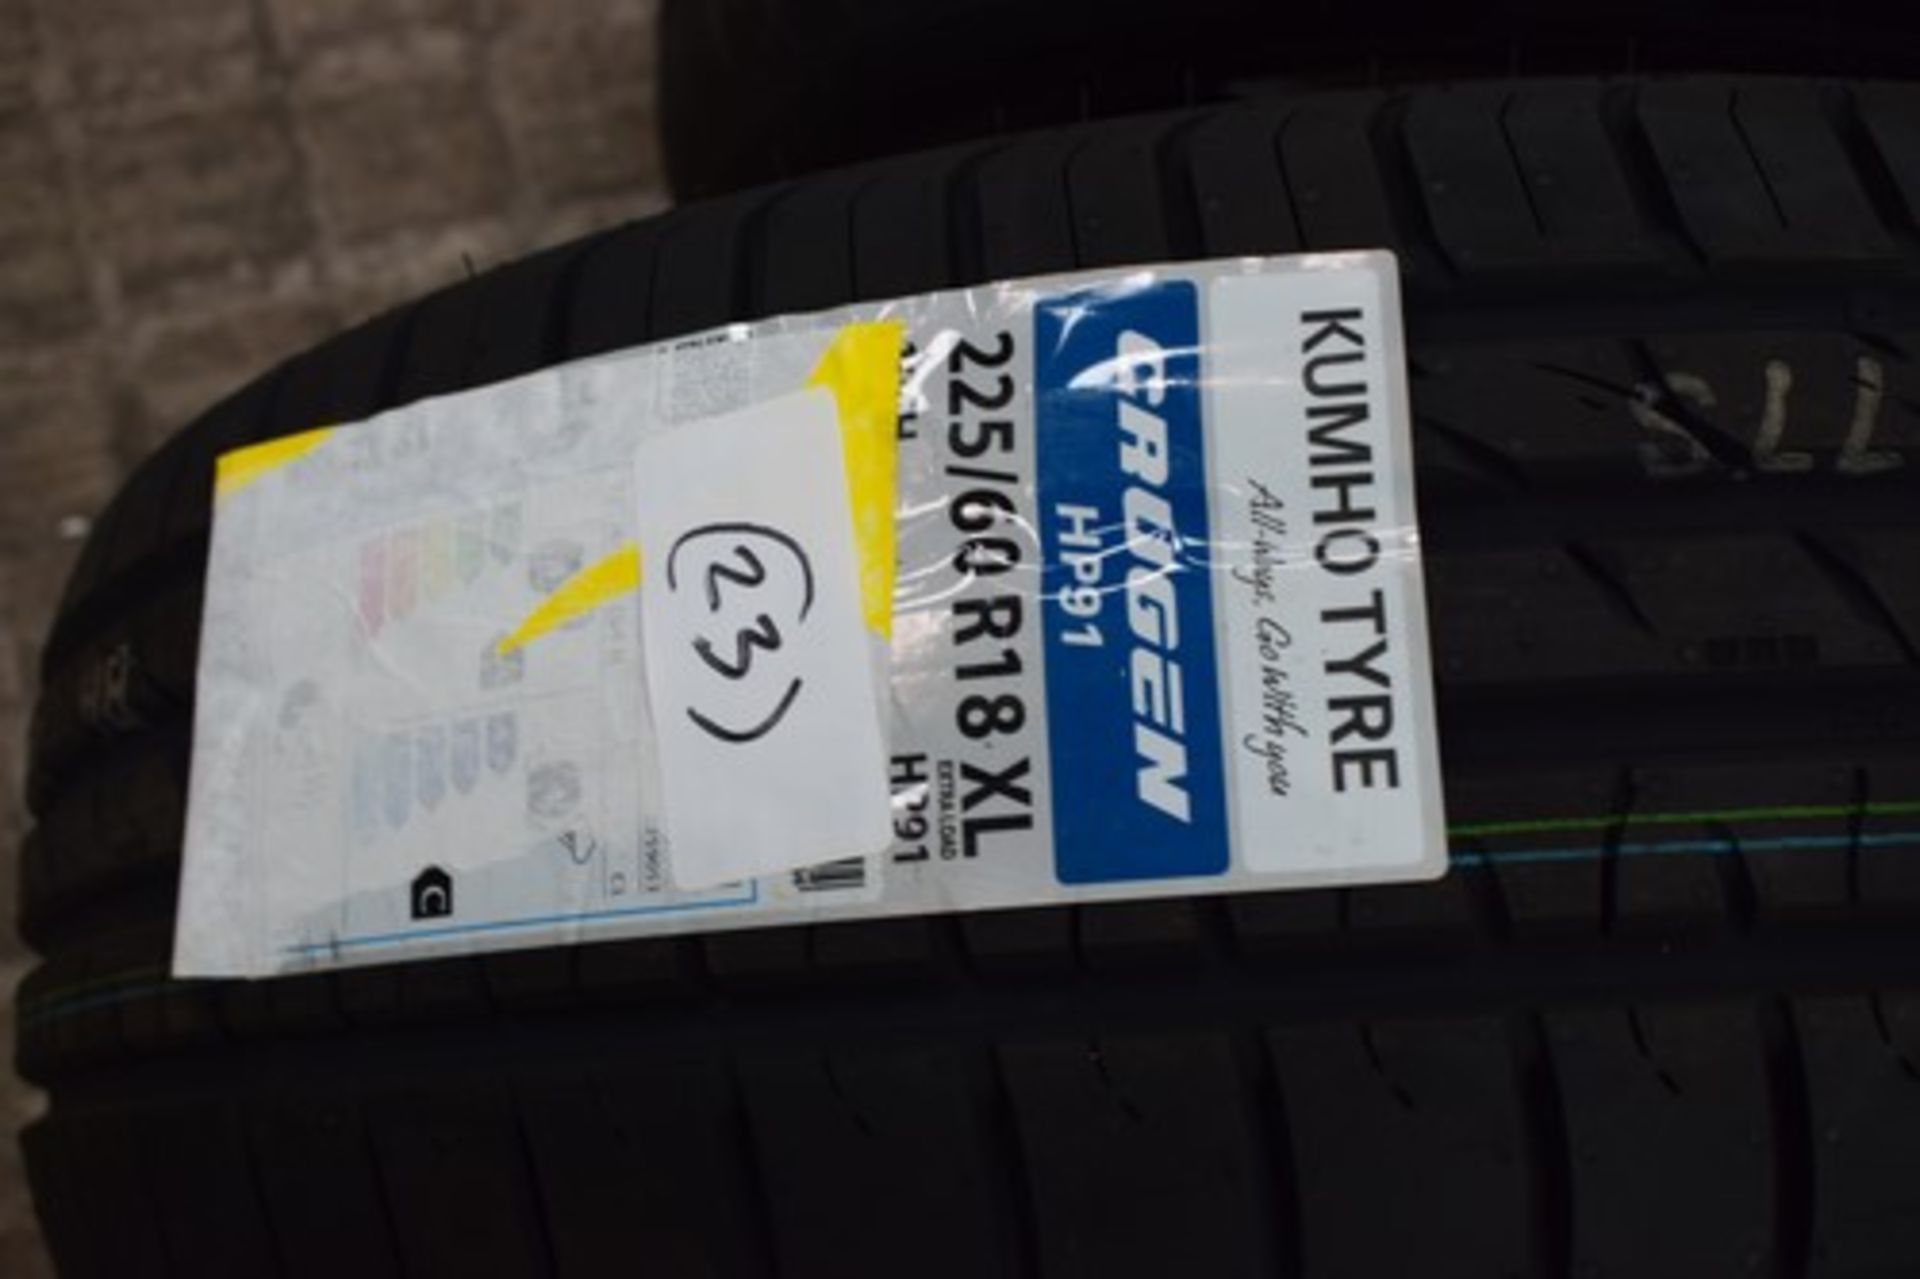 1 x Kumho Crugen HP91 tyre, size 225/60R18 104H XL - new with label (C2)(23)